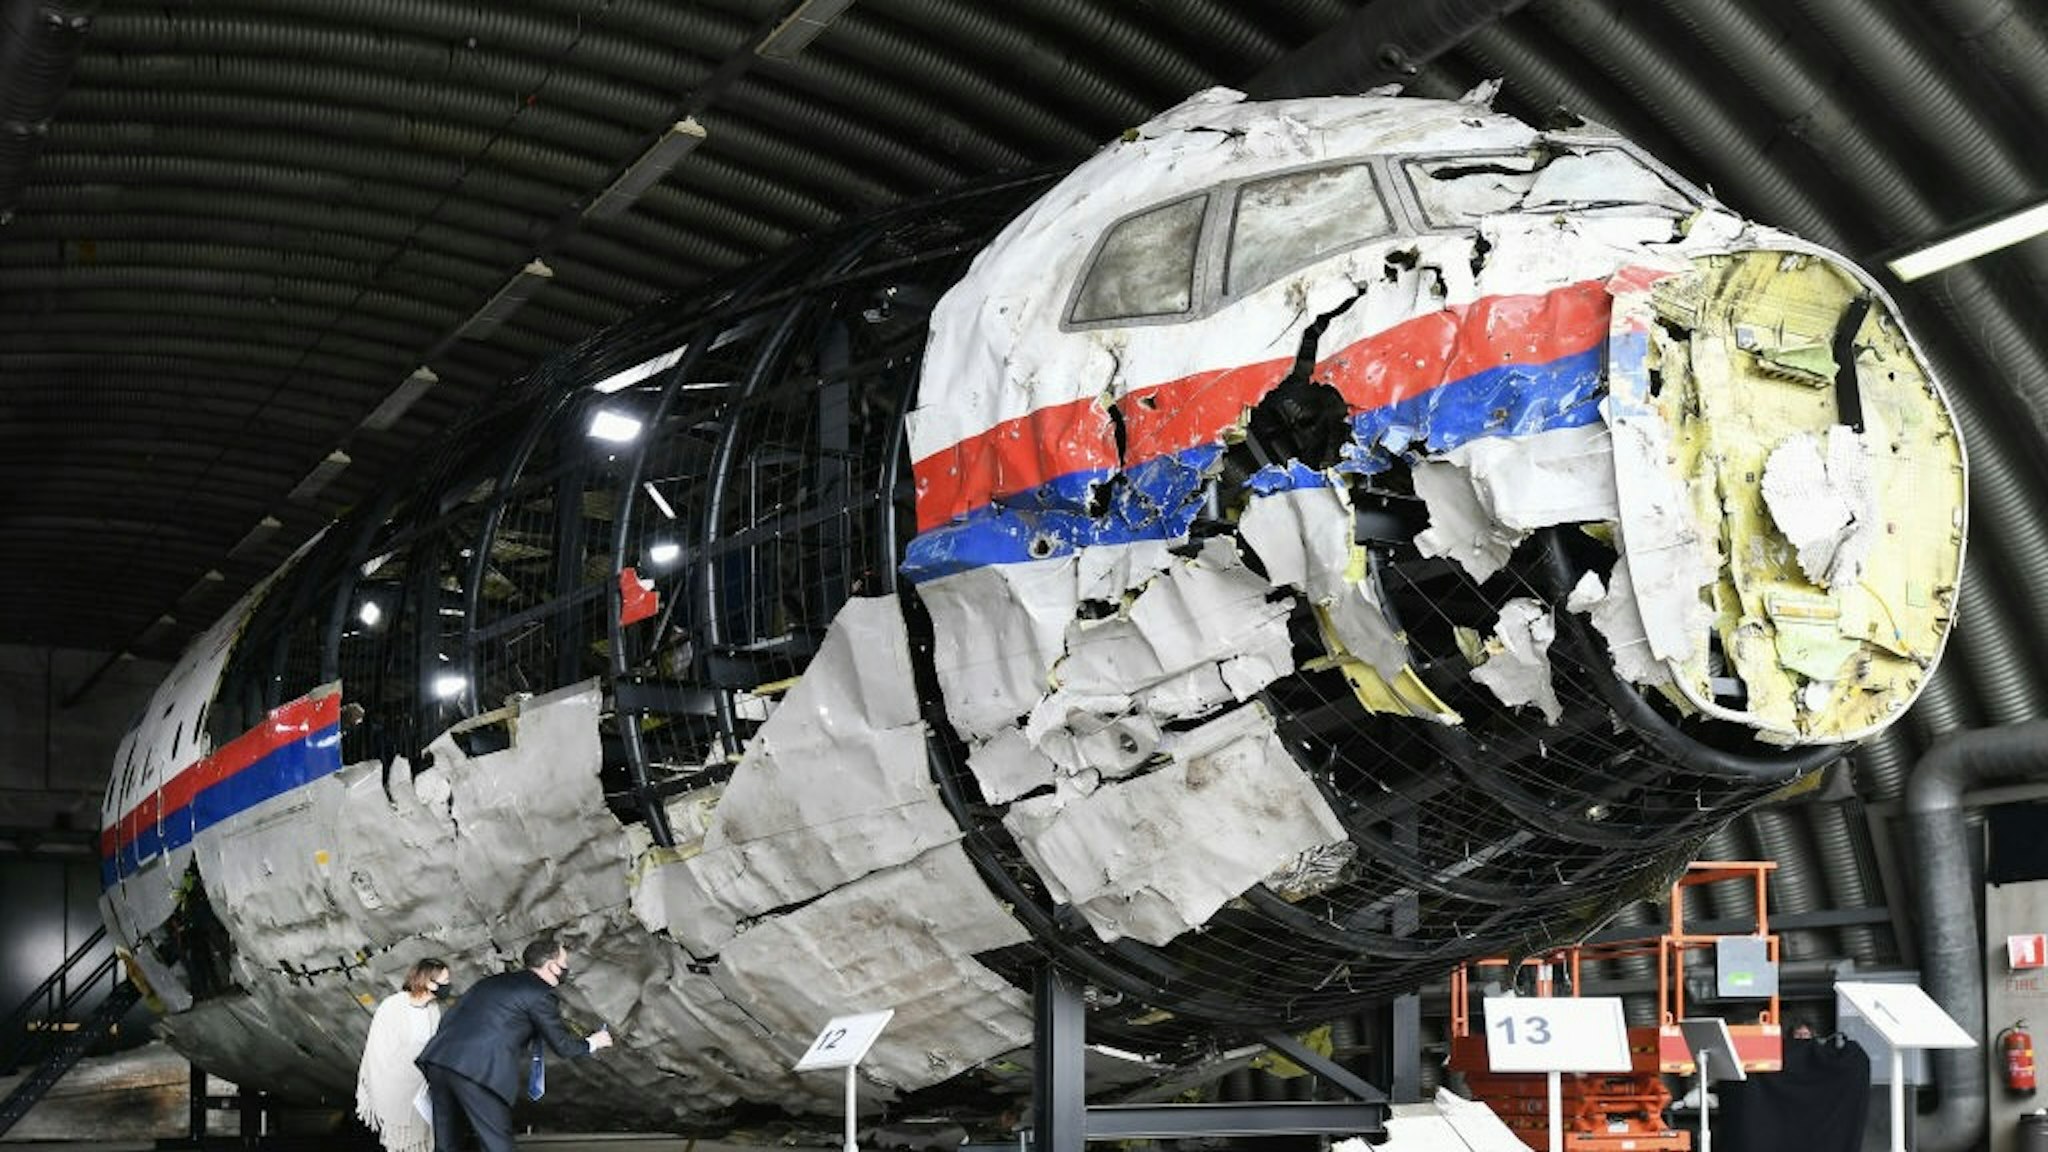 Judges View Flight MH-17 Wreckage Ahead Of Next Trial Phase REIJEN, NETHERLANDS - MAY 26: Lawyers attend the judges' inspection of the reconstruction of the MH17 wreckage, as part of the murder trial ahead of the beginning of a critical stage, on May 26, 2021 in Reijen, Netherlands. Judges and lawyers viewed the wreckage of Malaysian Airlines Flight 17, a commercial flight between Kuala Lumpur and the Netherlands that was shot down over Ukraine in 2014, ahead of a new phase in the trial of three Russians and a Ukrainian suspect. All 283 passengers and 15 crew members were killed. (Photo by Piroschka van de Wouw - Pool/Getty Images) Pool / Pool